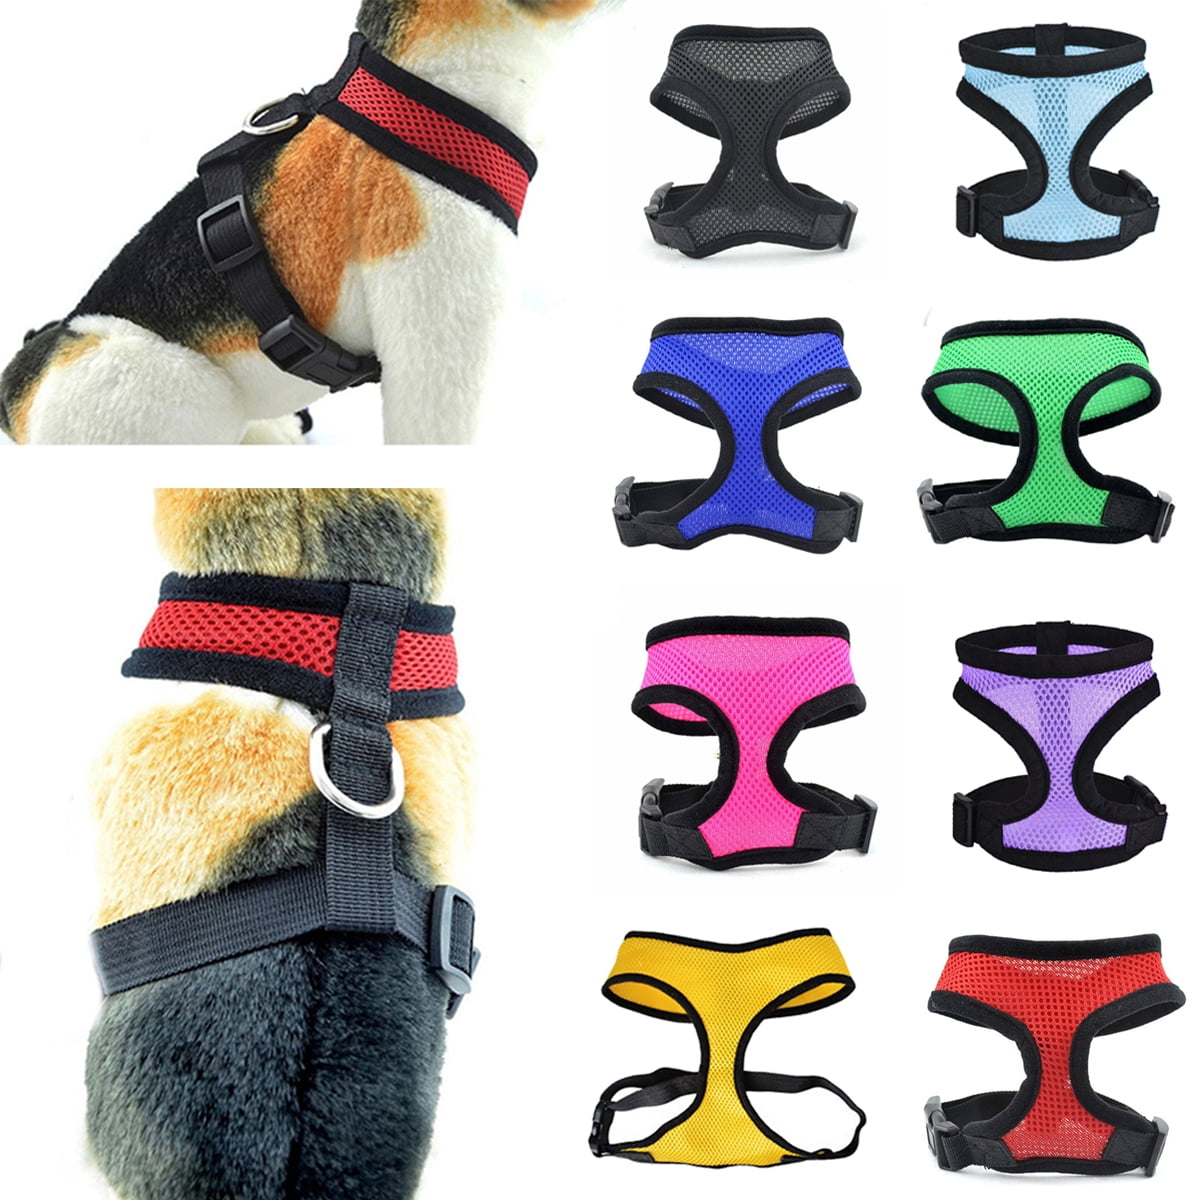 Pet Control Harness for Dog Puppy Cat Strap Soft Air Mesh Walking Collar Vest 